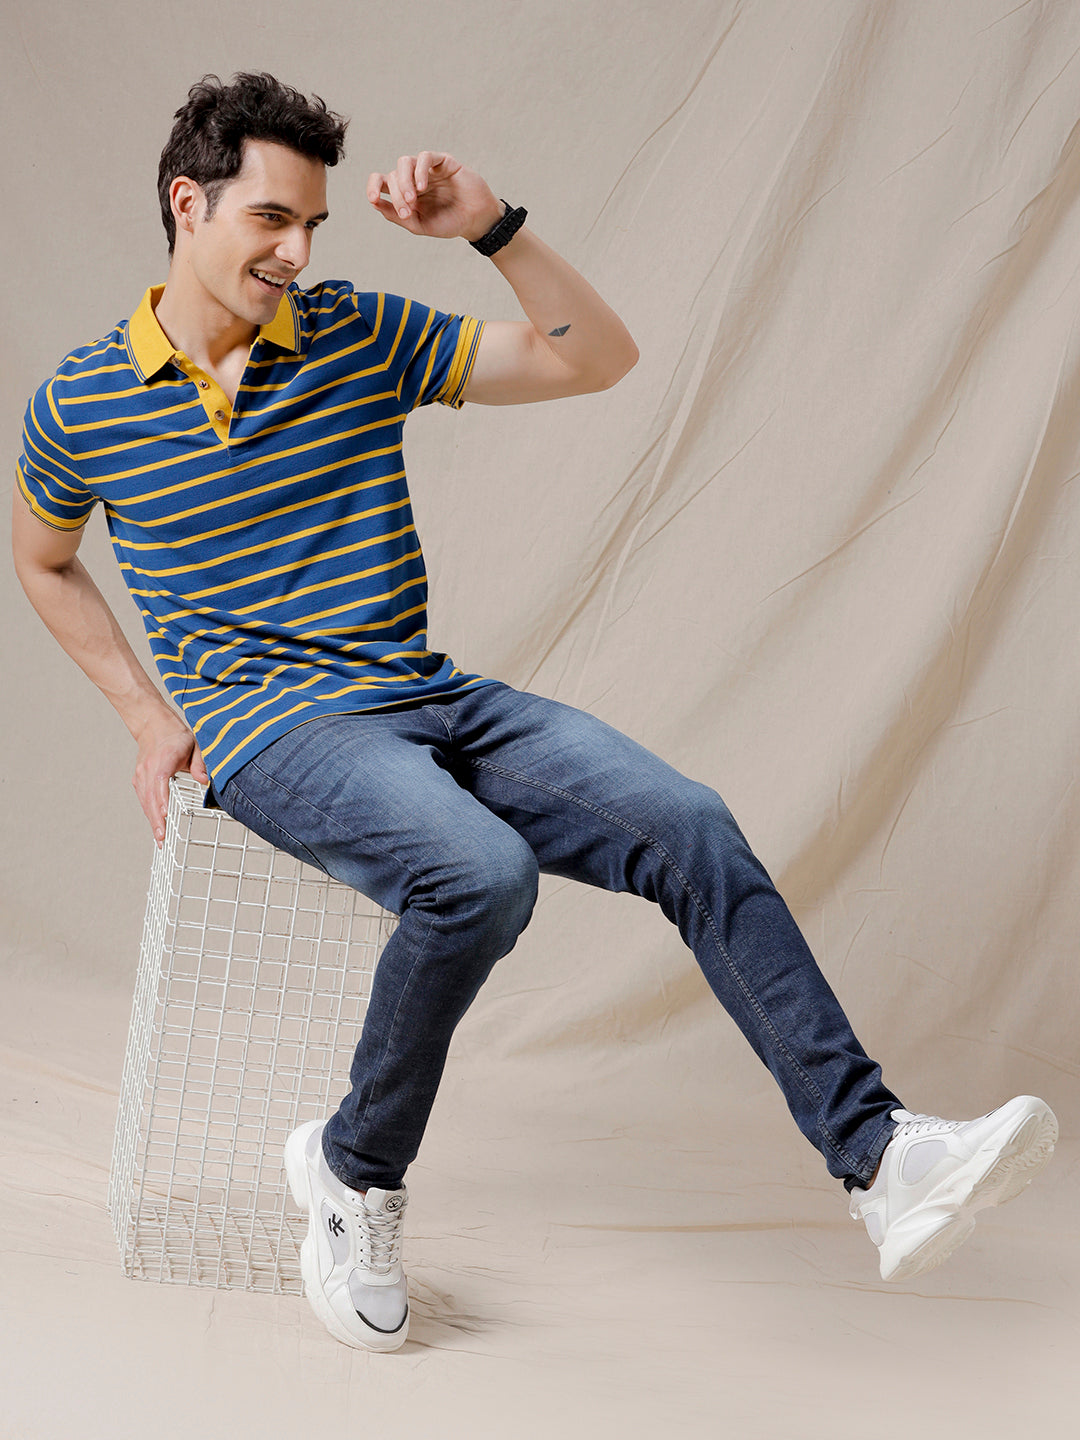 Yellow On Blue Striped Polo T-Shirt